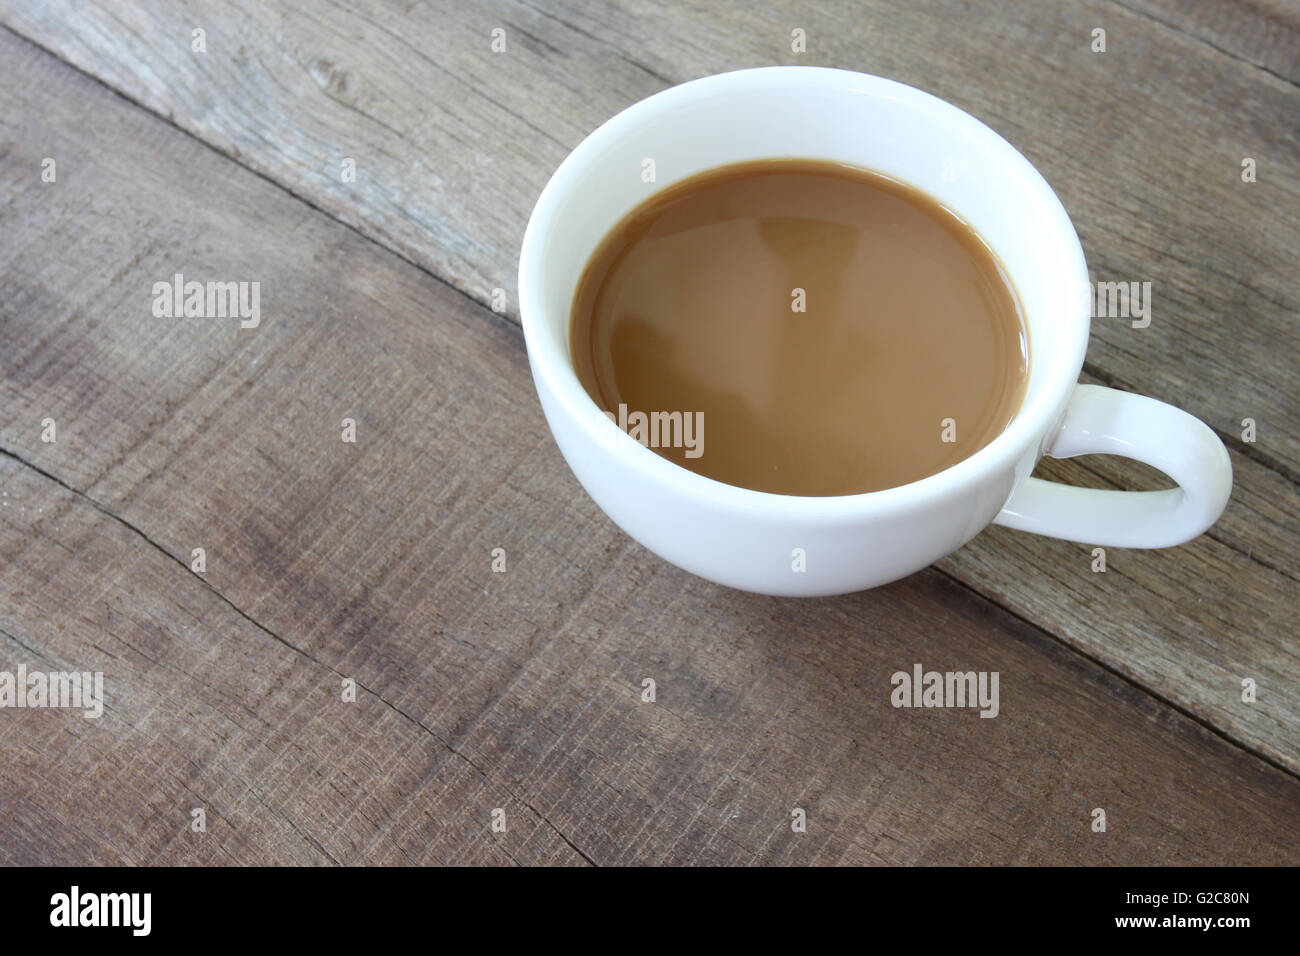 White coffee cup on a wooden floor and concept for beverage. Stock Photo